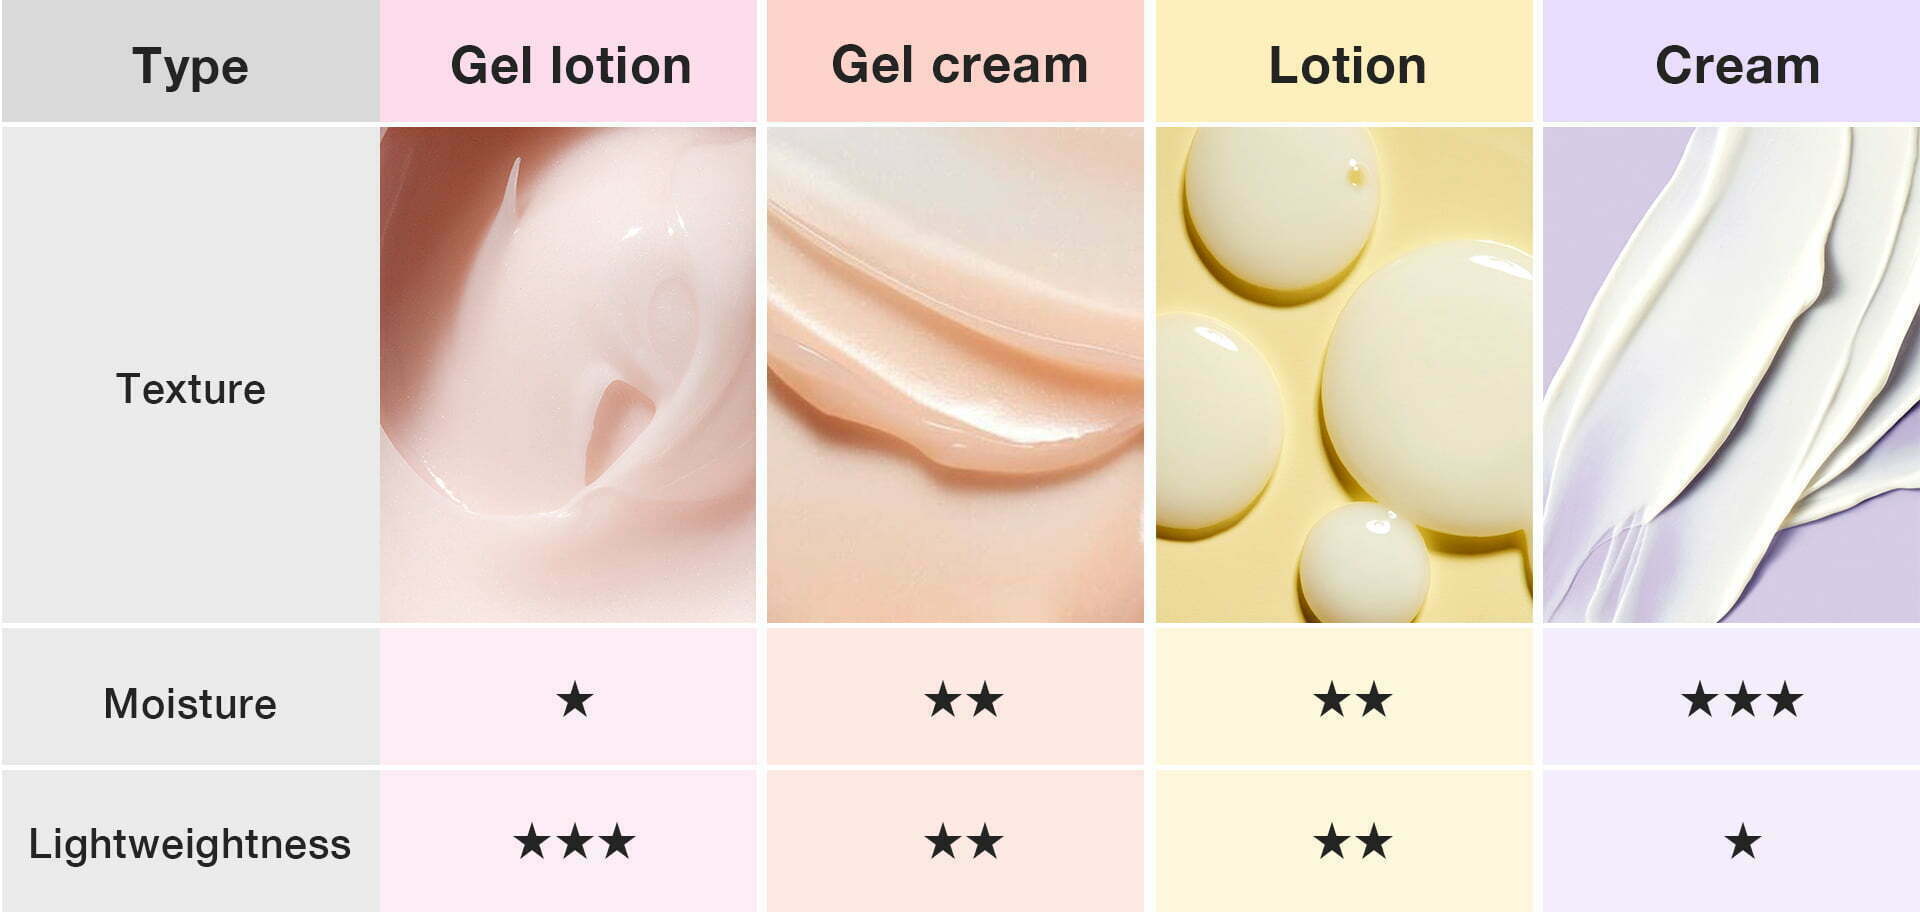 vandfald gateway Øst Timor Lotion, cream, gel-lotion, or gel-cream? How to choose wisely? - UNICARE